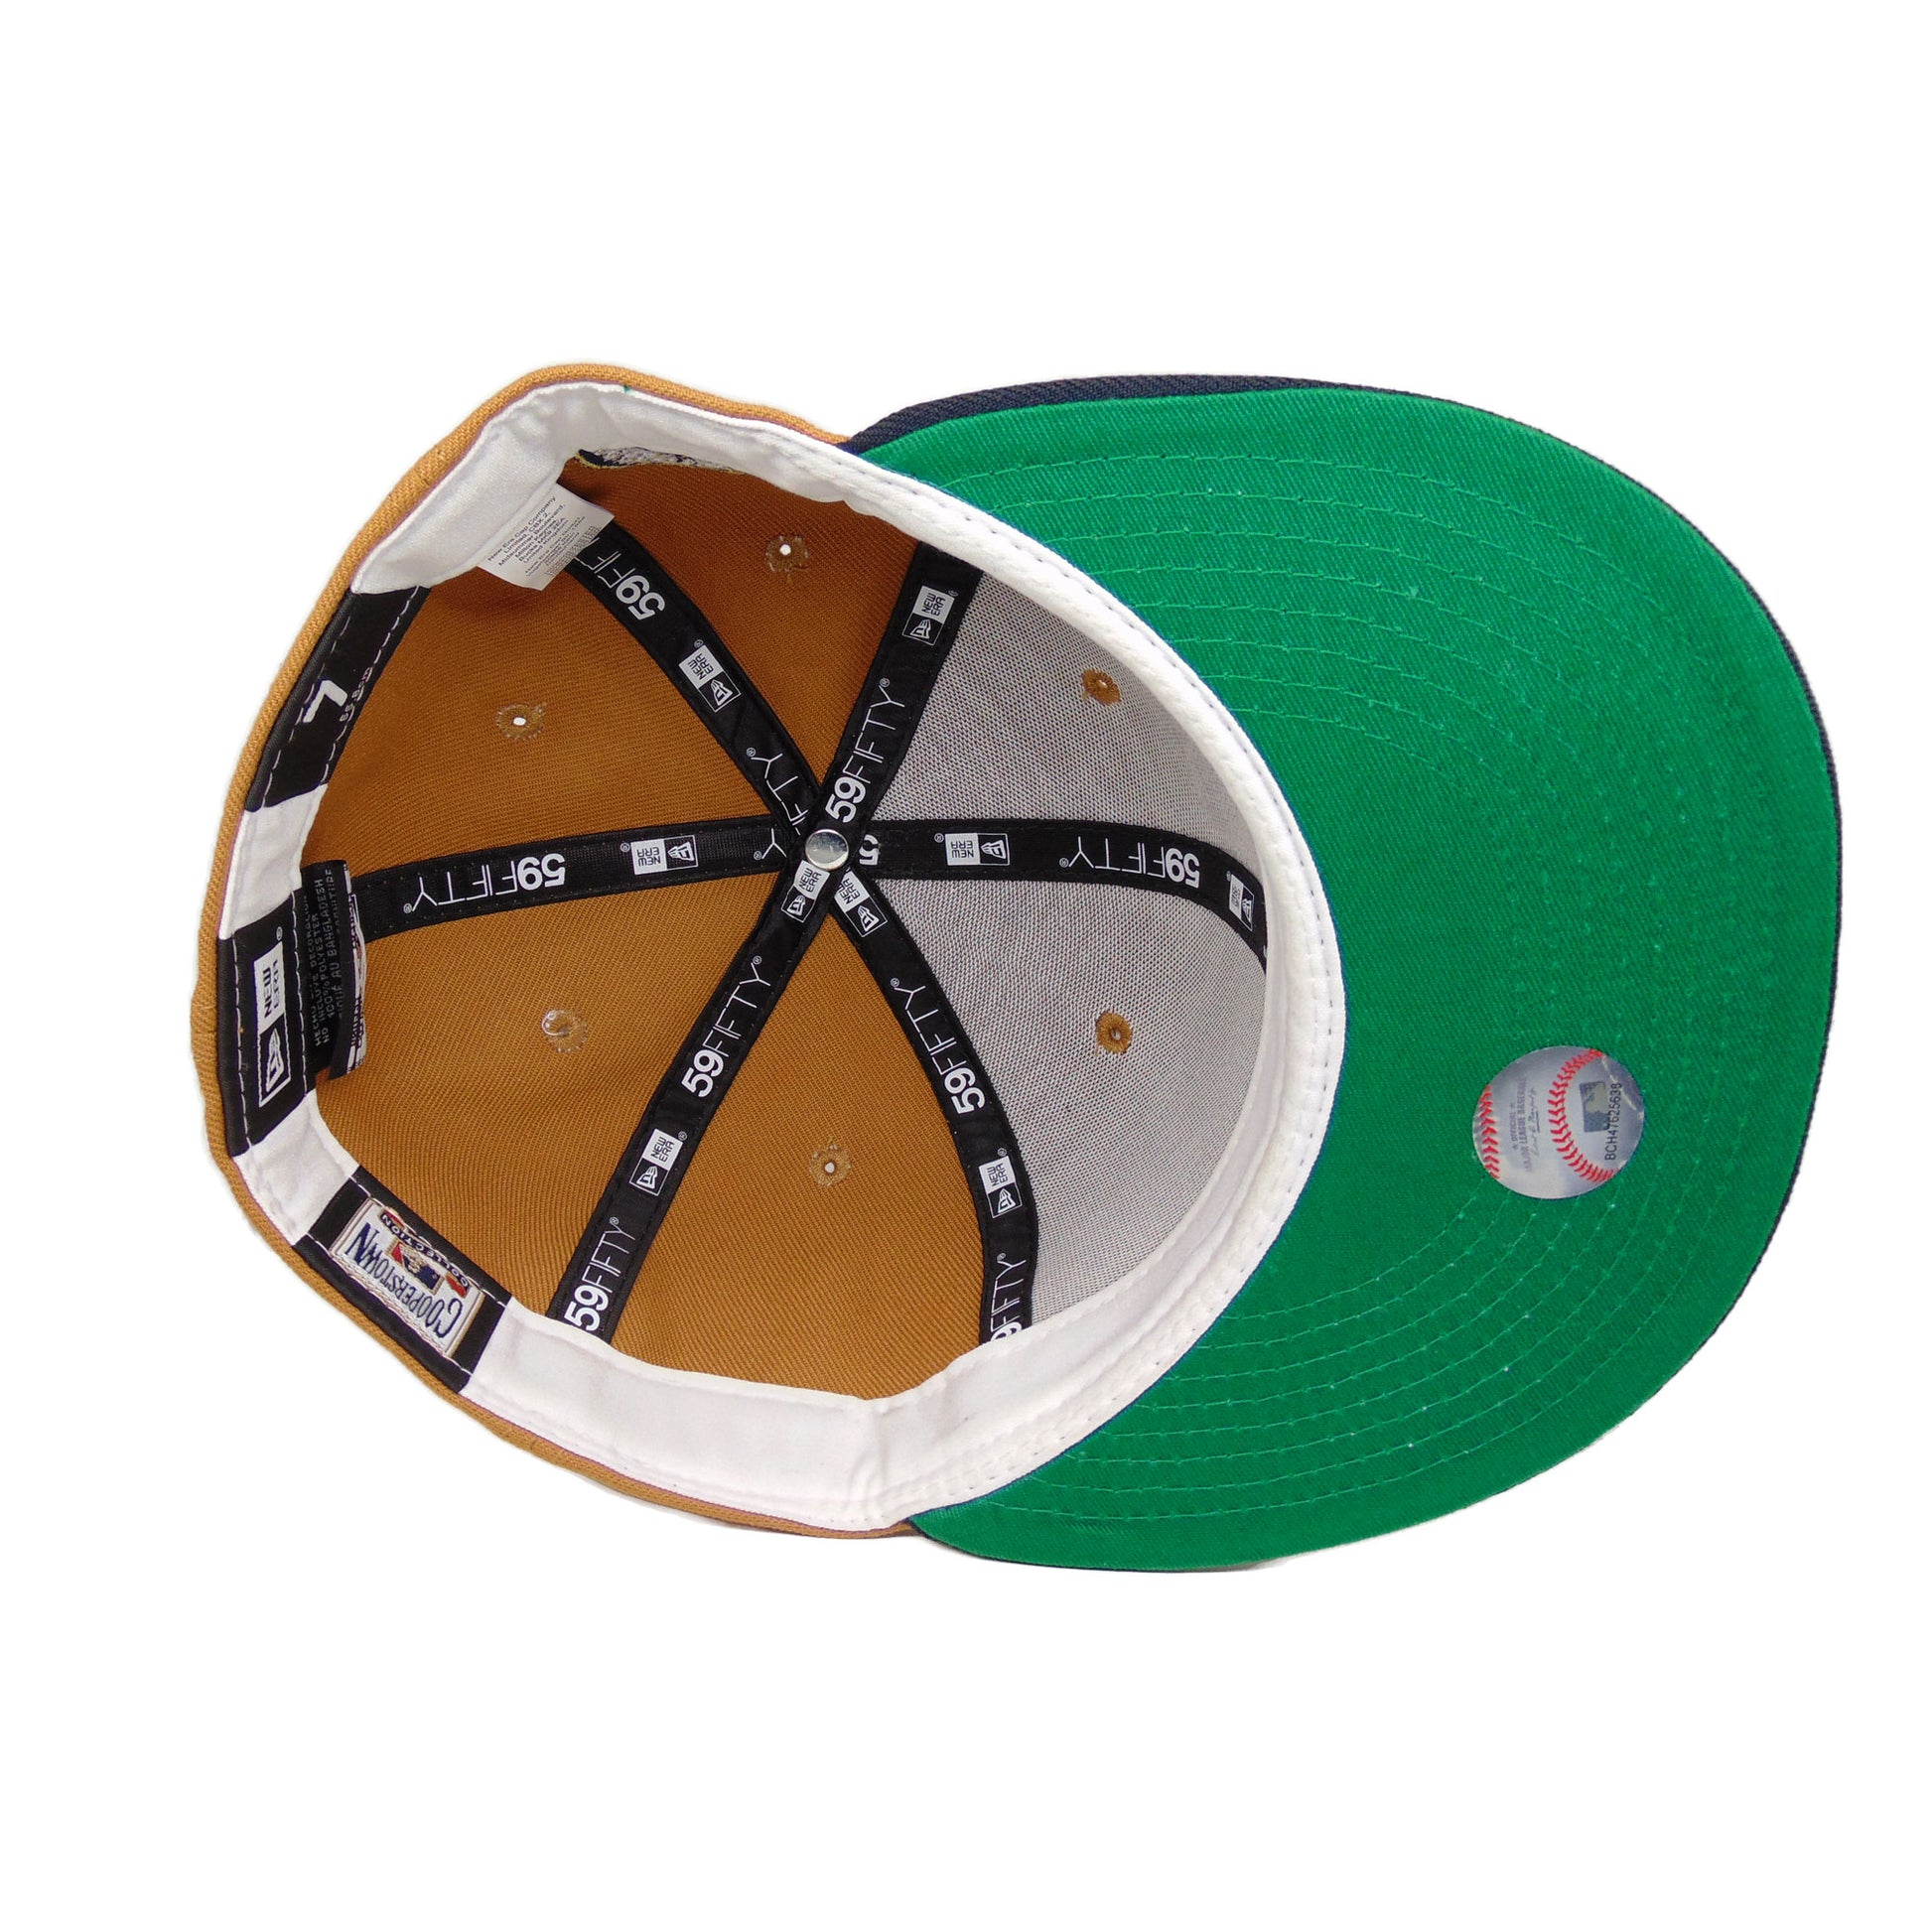 Off White Houston Astros Orange Bottom 20th Anniversary Side Patch New Era 59FIFTY Fitted 7